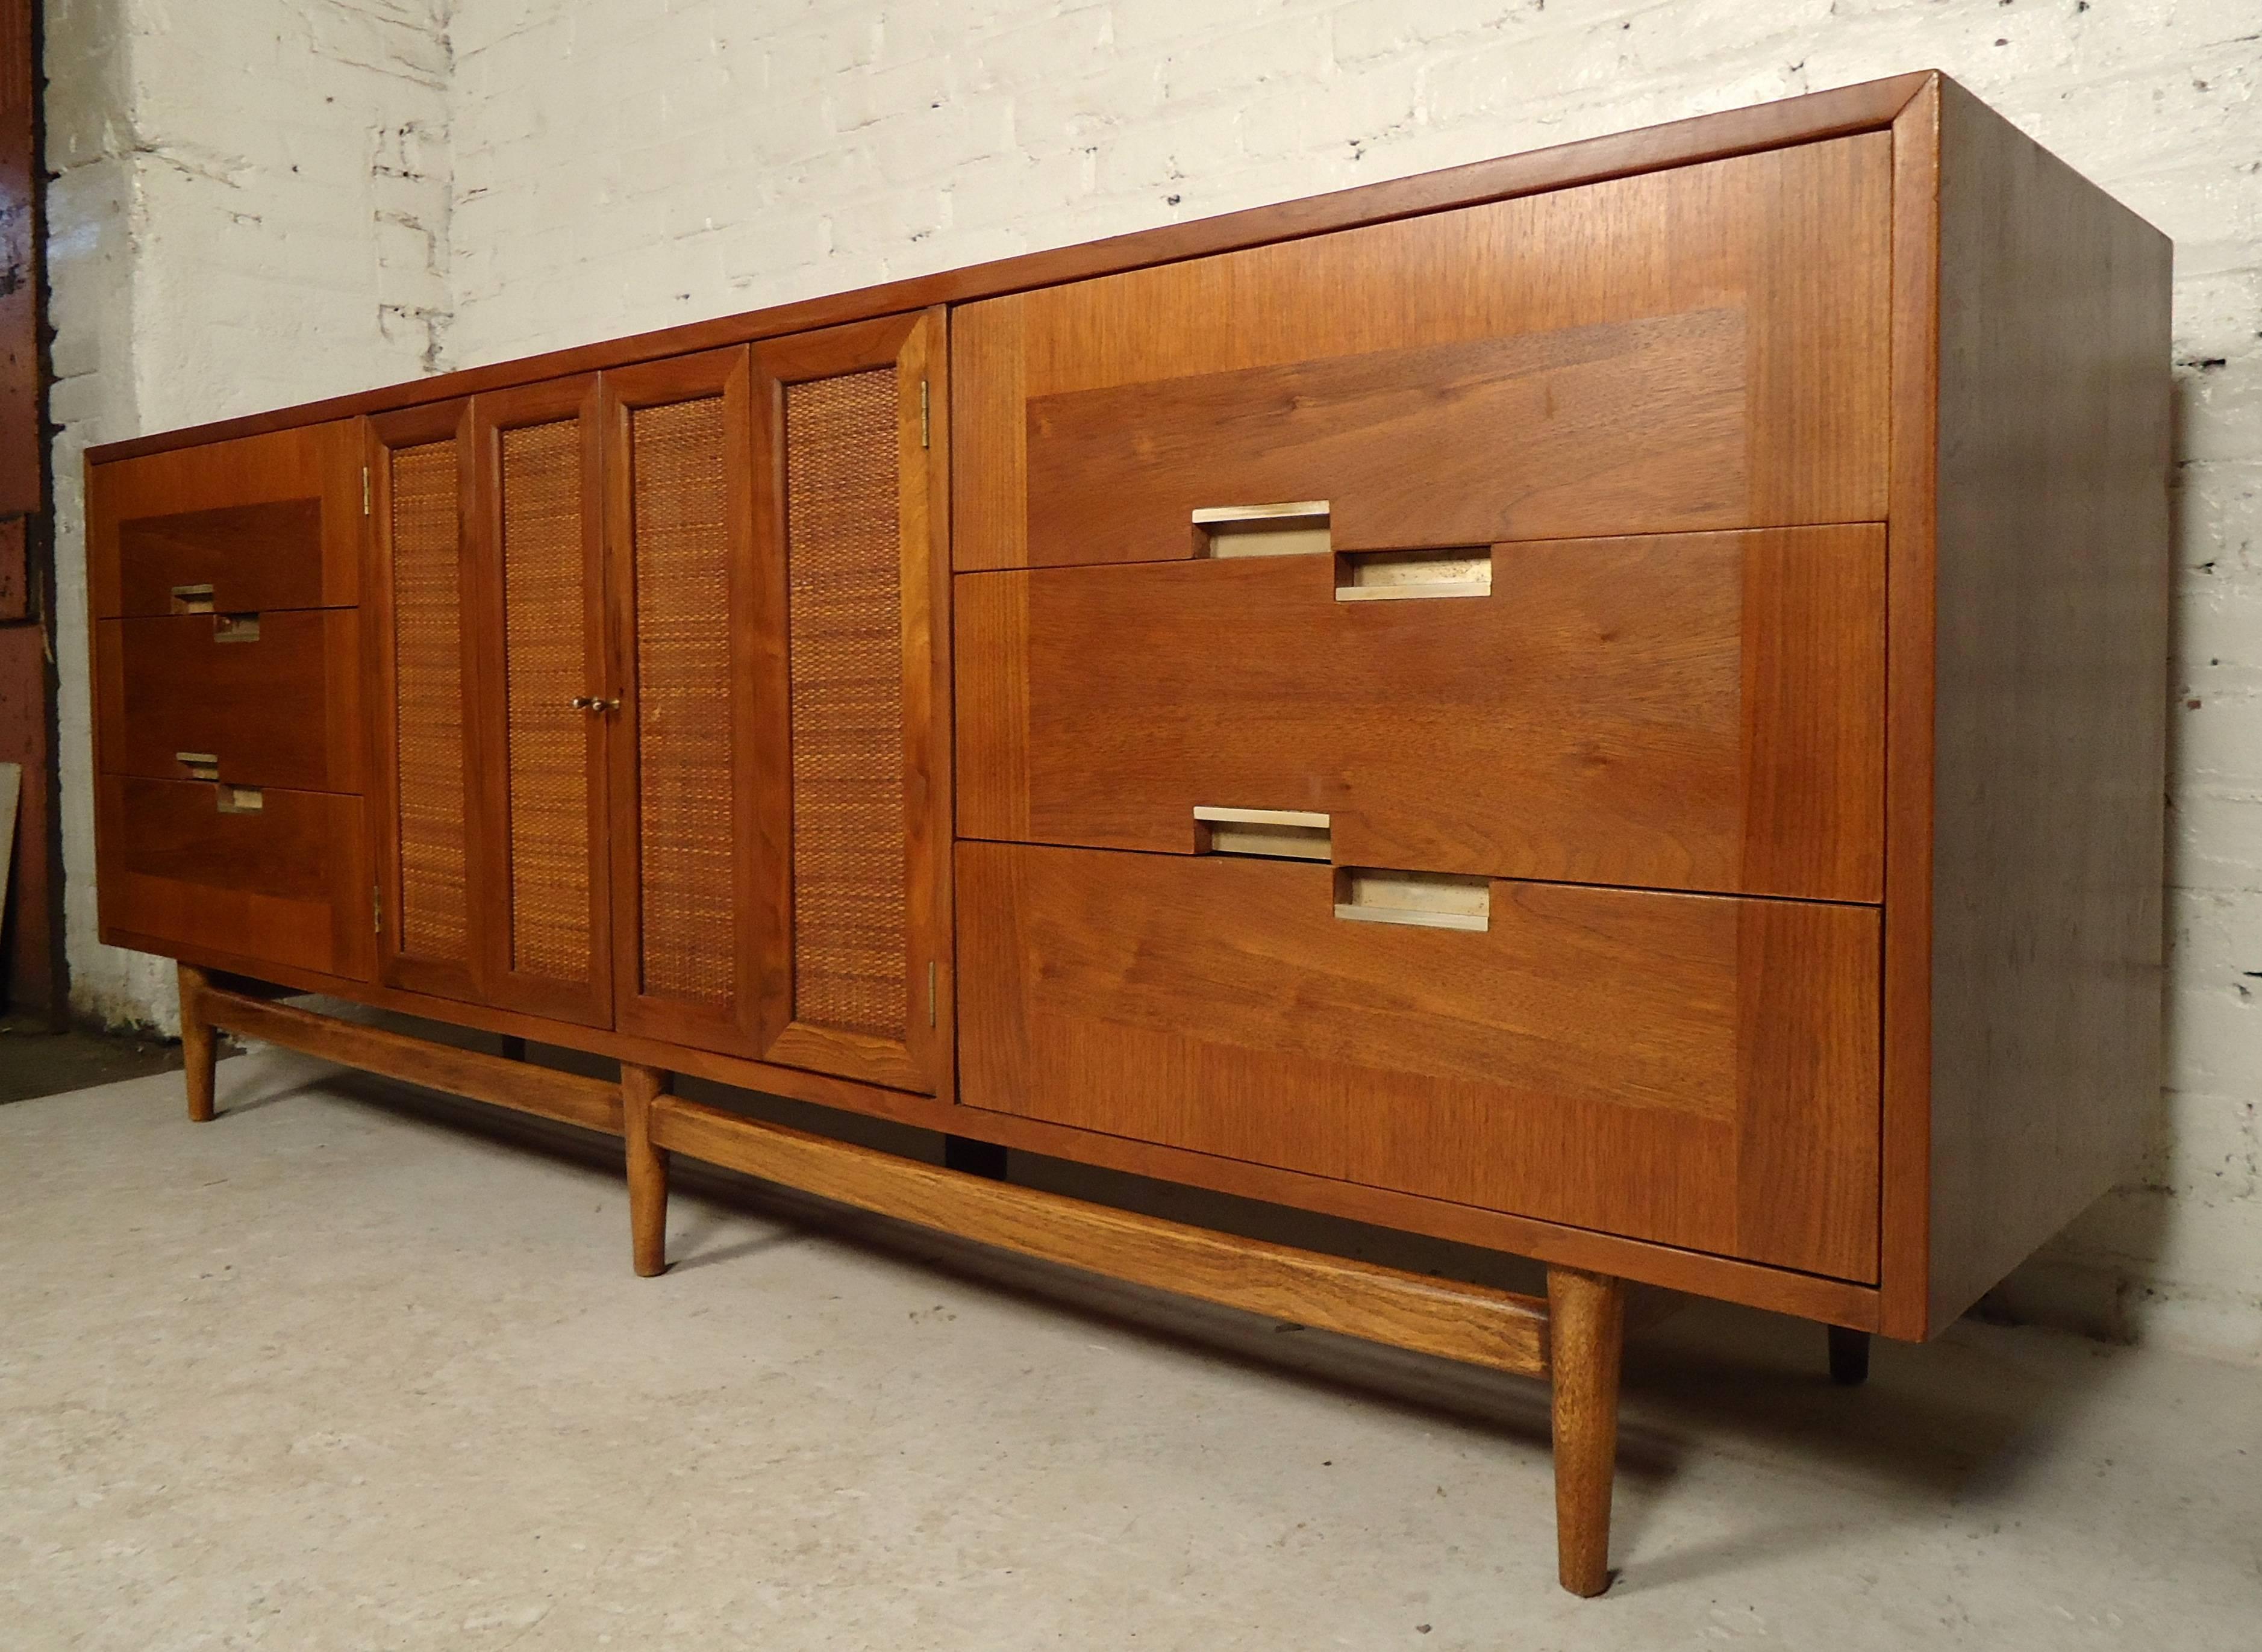 Beautiful long vintage-modern credenza by Martinsville features rich walnut grain, nine pull-out drawers, metal handles and a set of wicker front doors all on sturdy wooden legs.

Please confirm item location (NY or NJ).